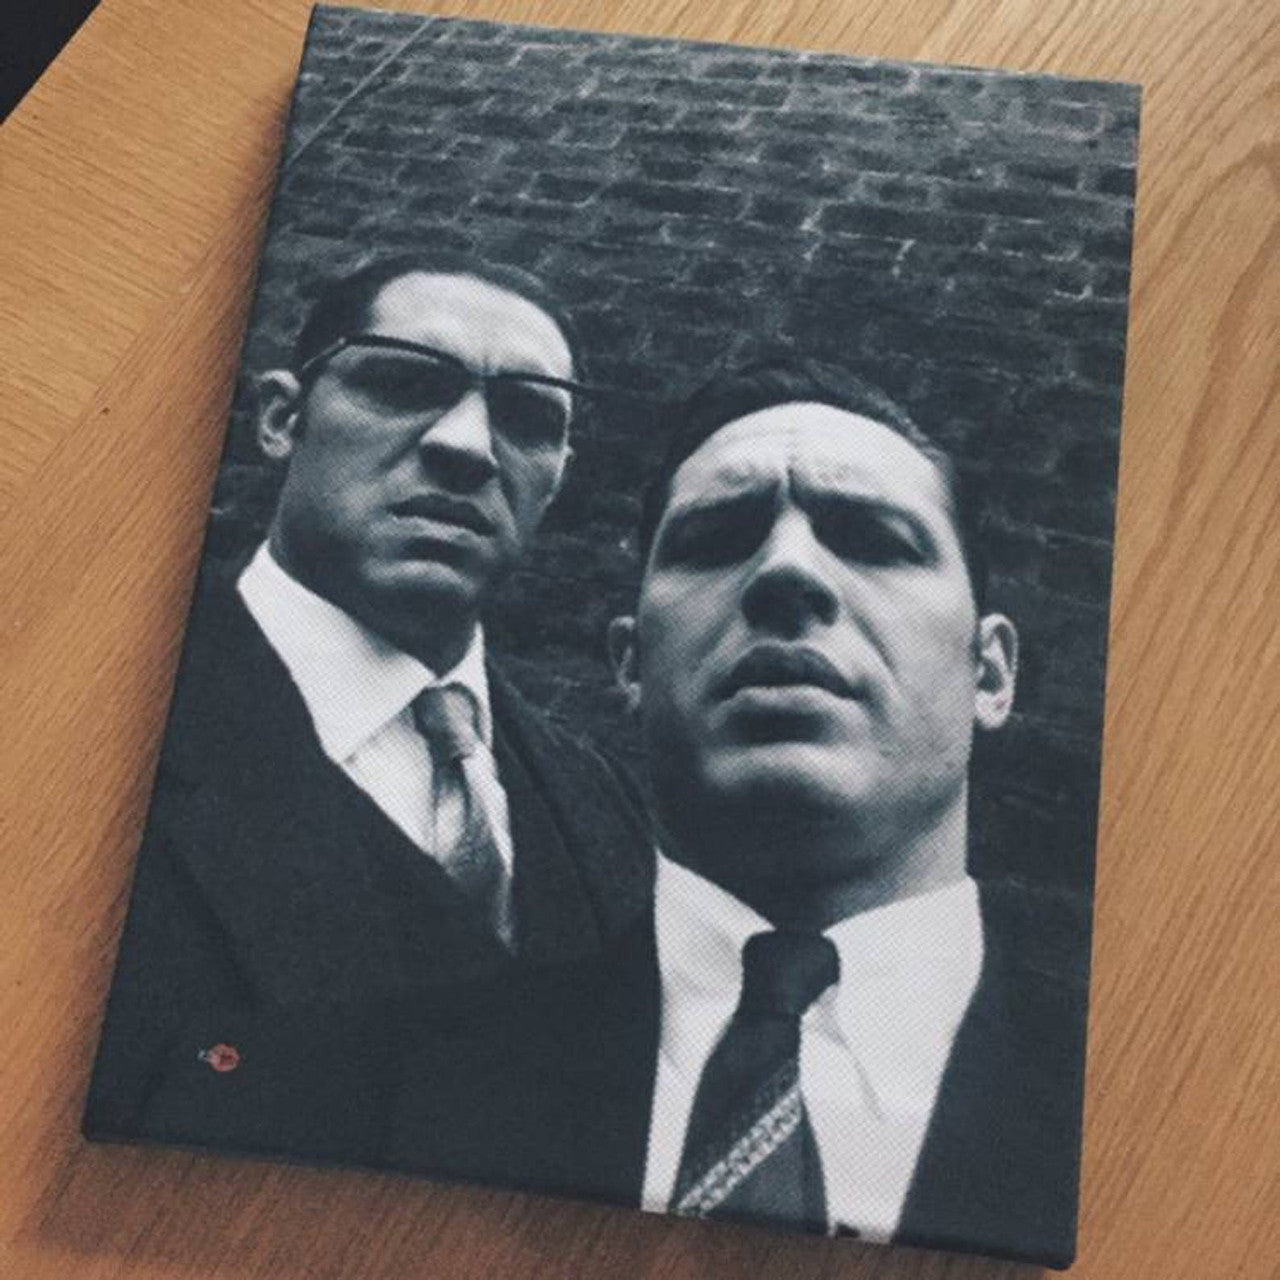 Tom Hardy/Krays KiSS Poster or Canvas - The Kray Twins - Legend - Movie, selfie - Gangster Wall Art - British London - Movie Fan - Gift idea Christmas